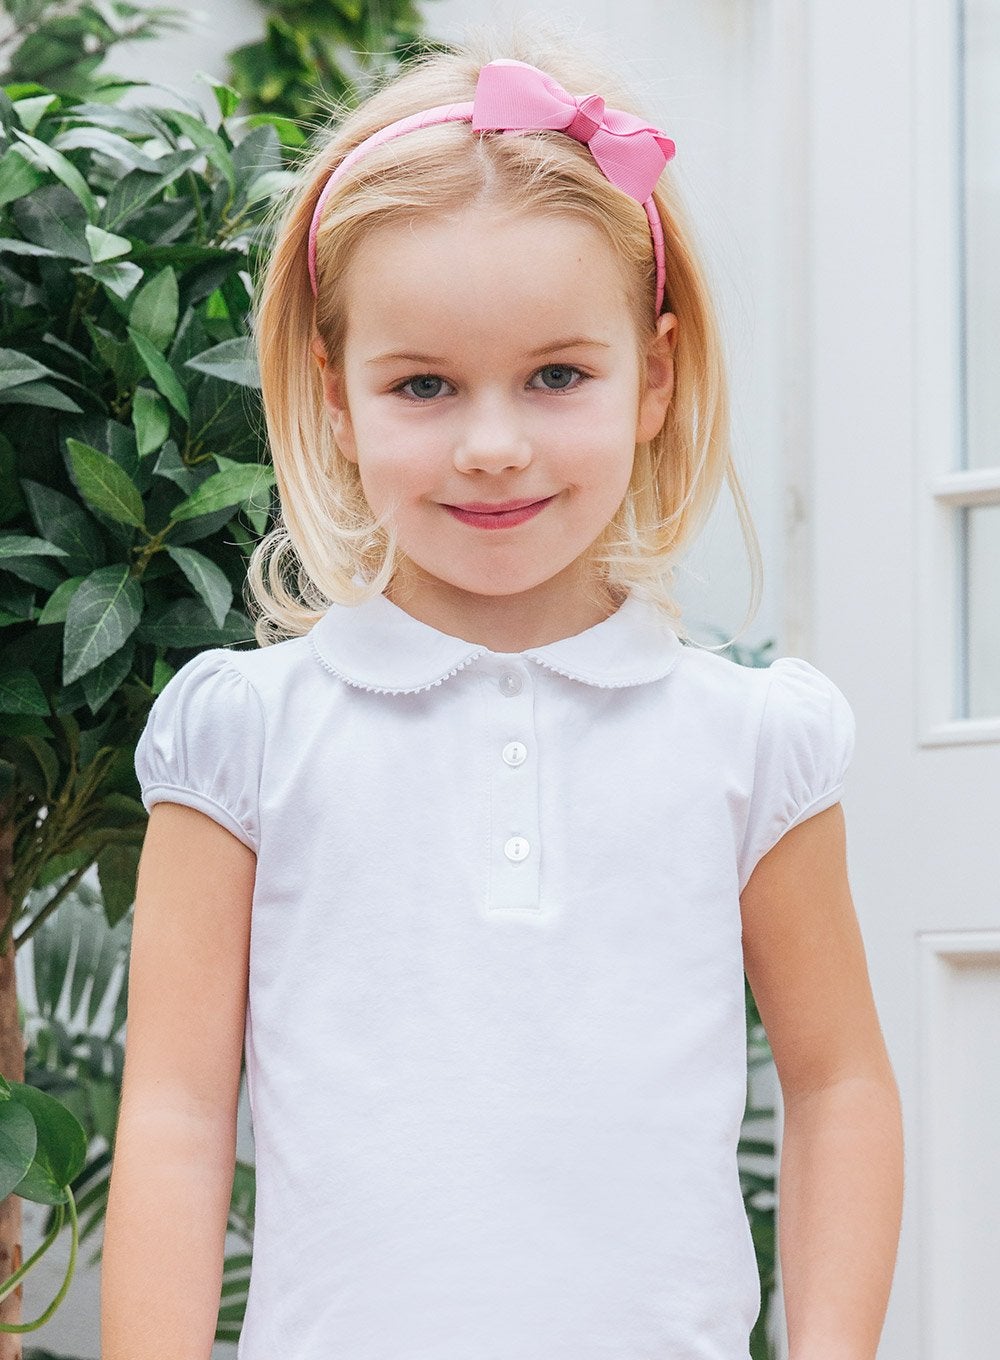 Confiture Top Olivia Polo Shirt - Trotters Childrenswear